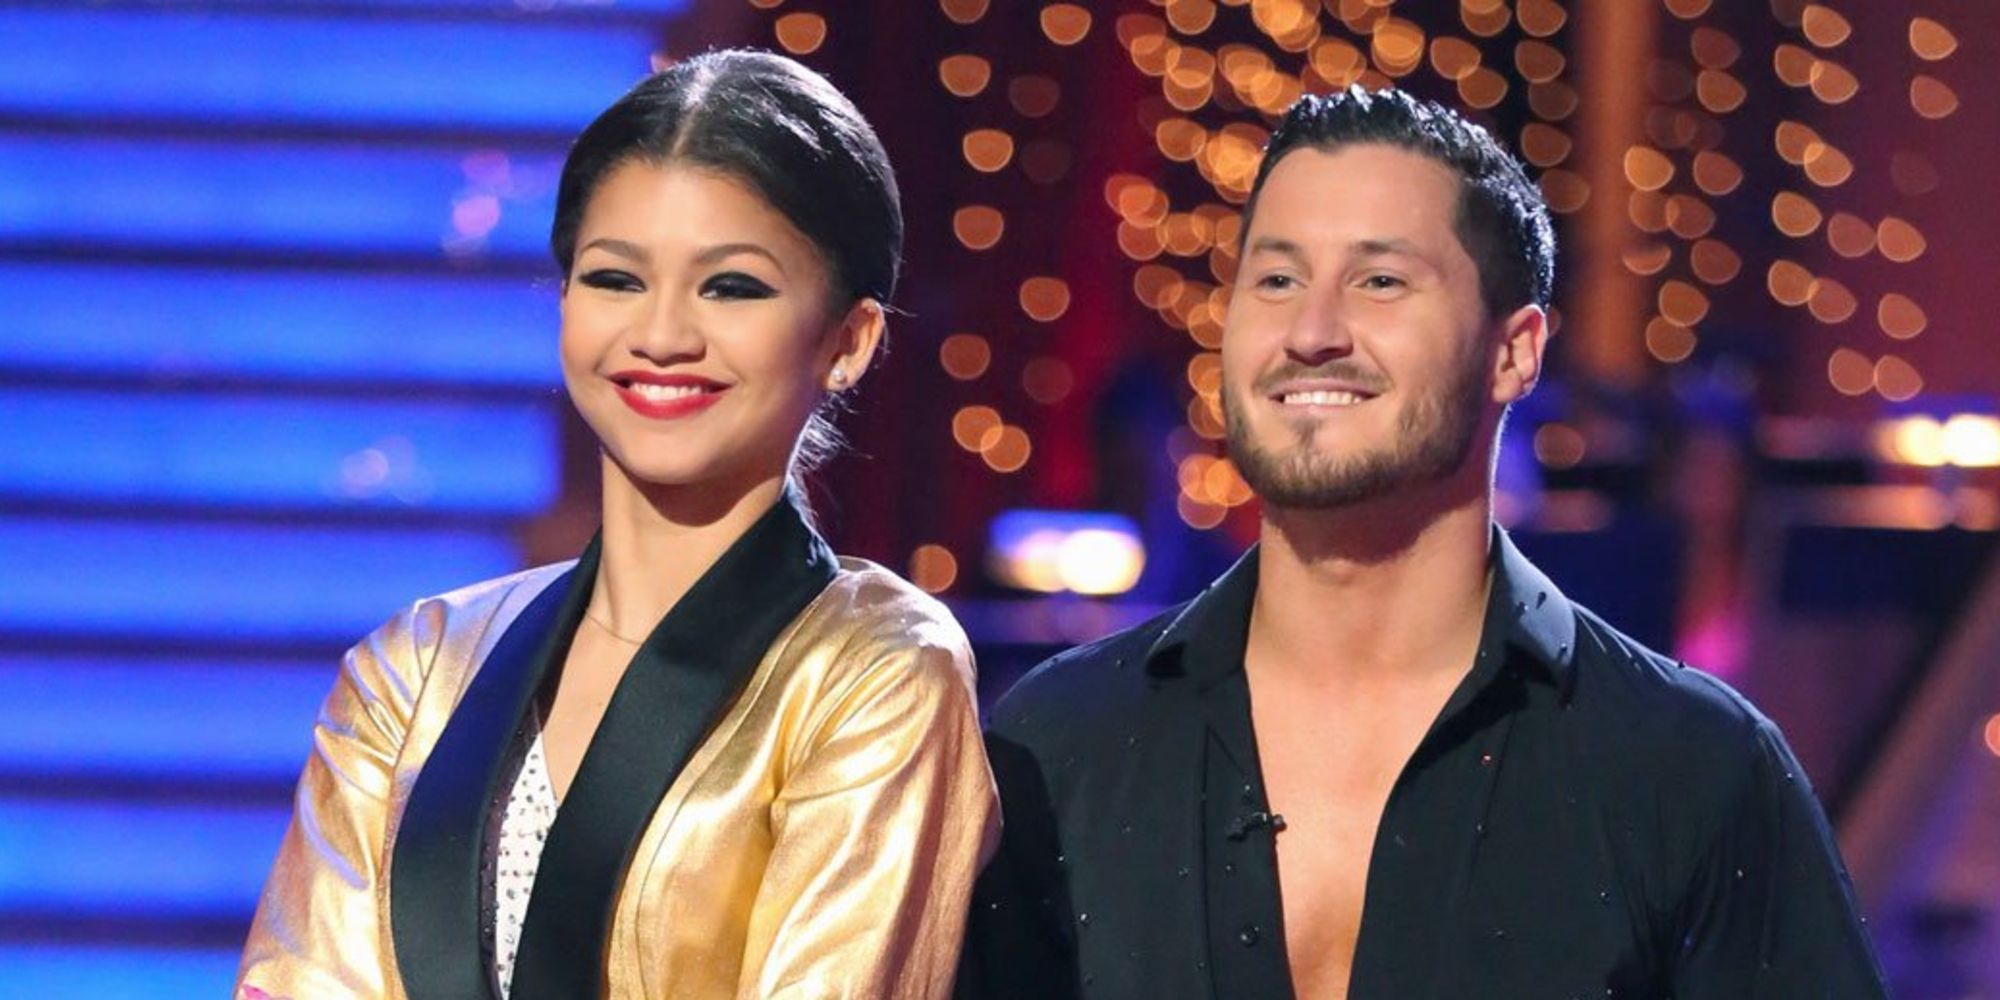 DWTS A Breakdown Of What The Dancers, Stars & Hosts Are Paid